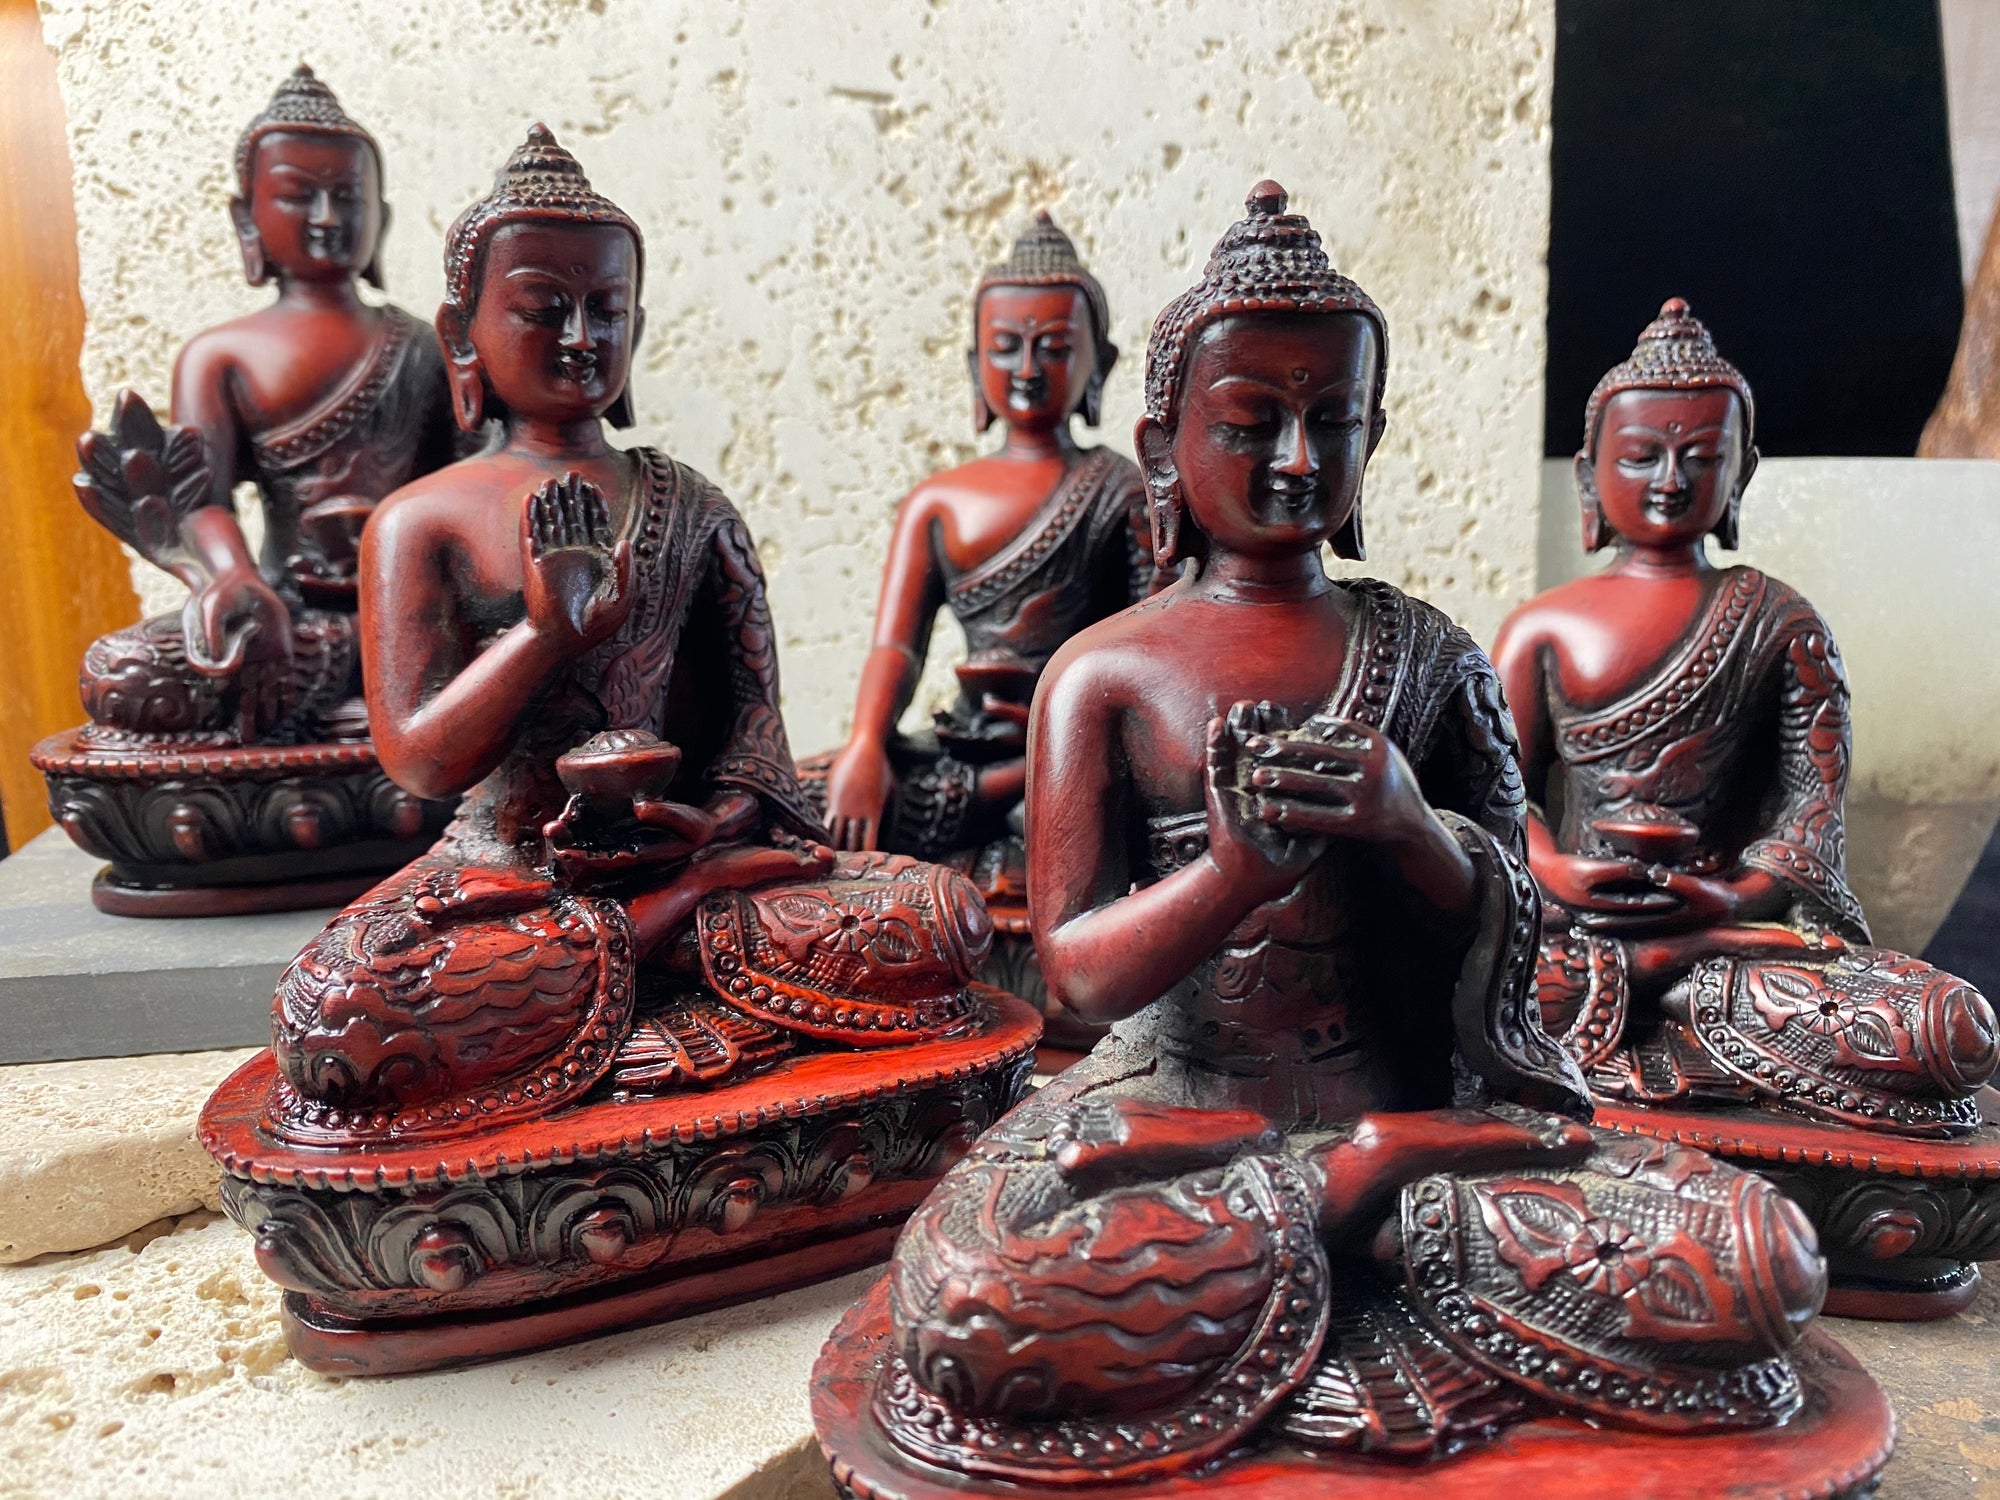 Resin buddha statues from Nepal